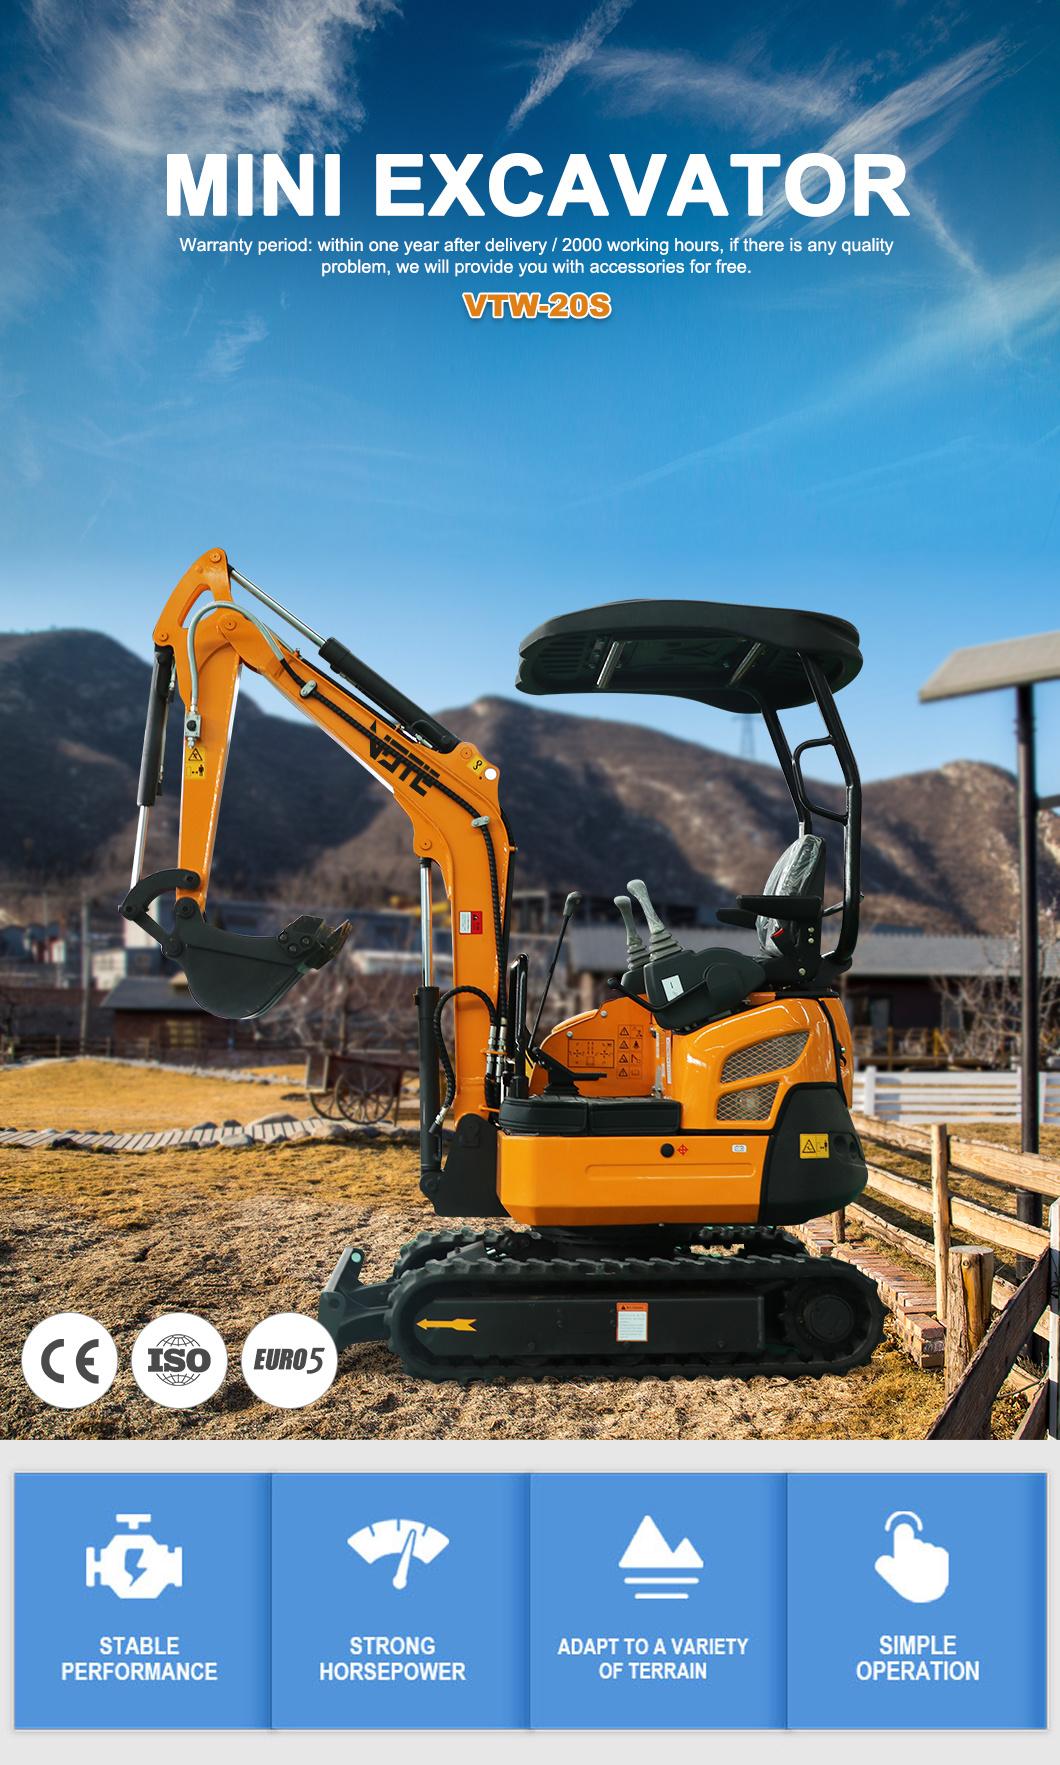 Zero Tail Hydraulic Mini Excavator 2 Tons 2000kg CE Approval Meet Euro V/EPA Emission Bagger Excavator with Various Attachments